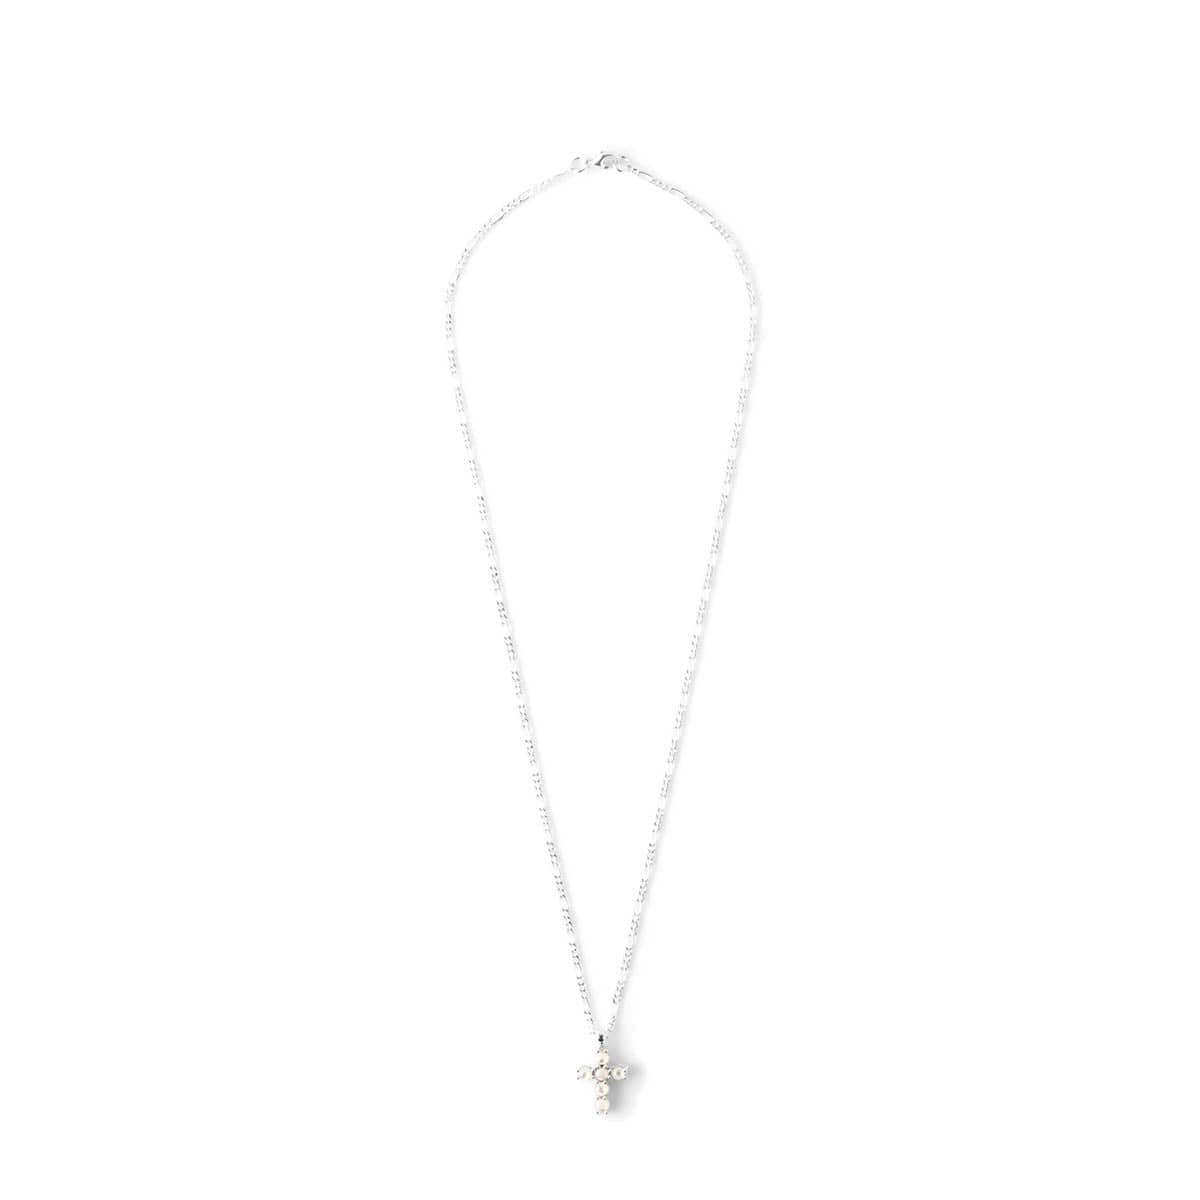 Maple Jewelry SILVER 925/MOTHER OF PEARL / 60CM CROSS CHAIN